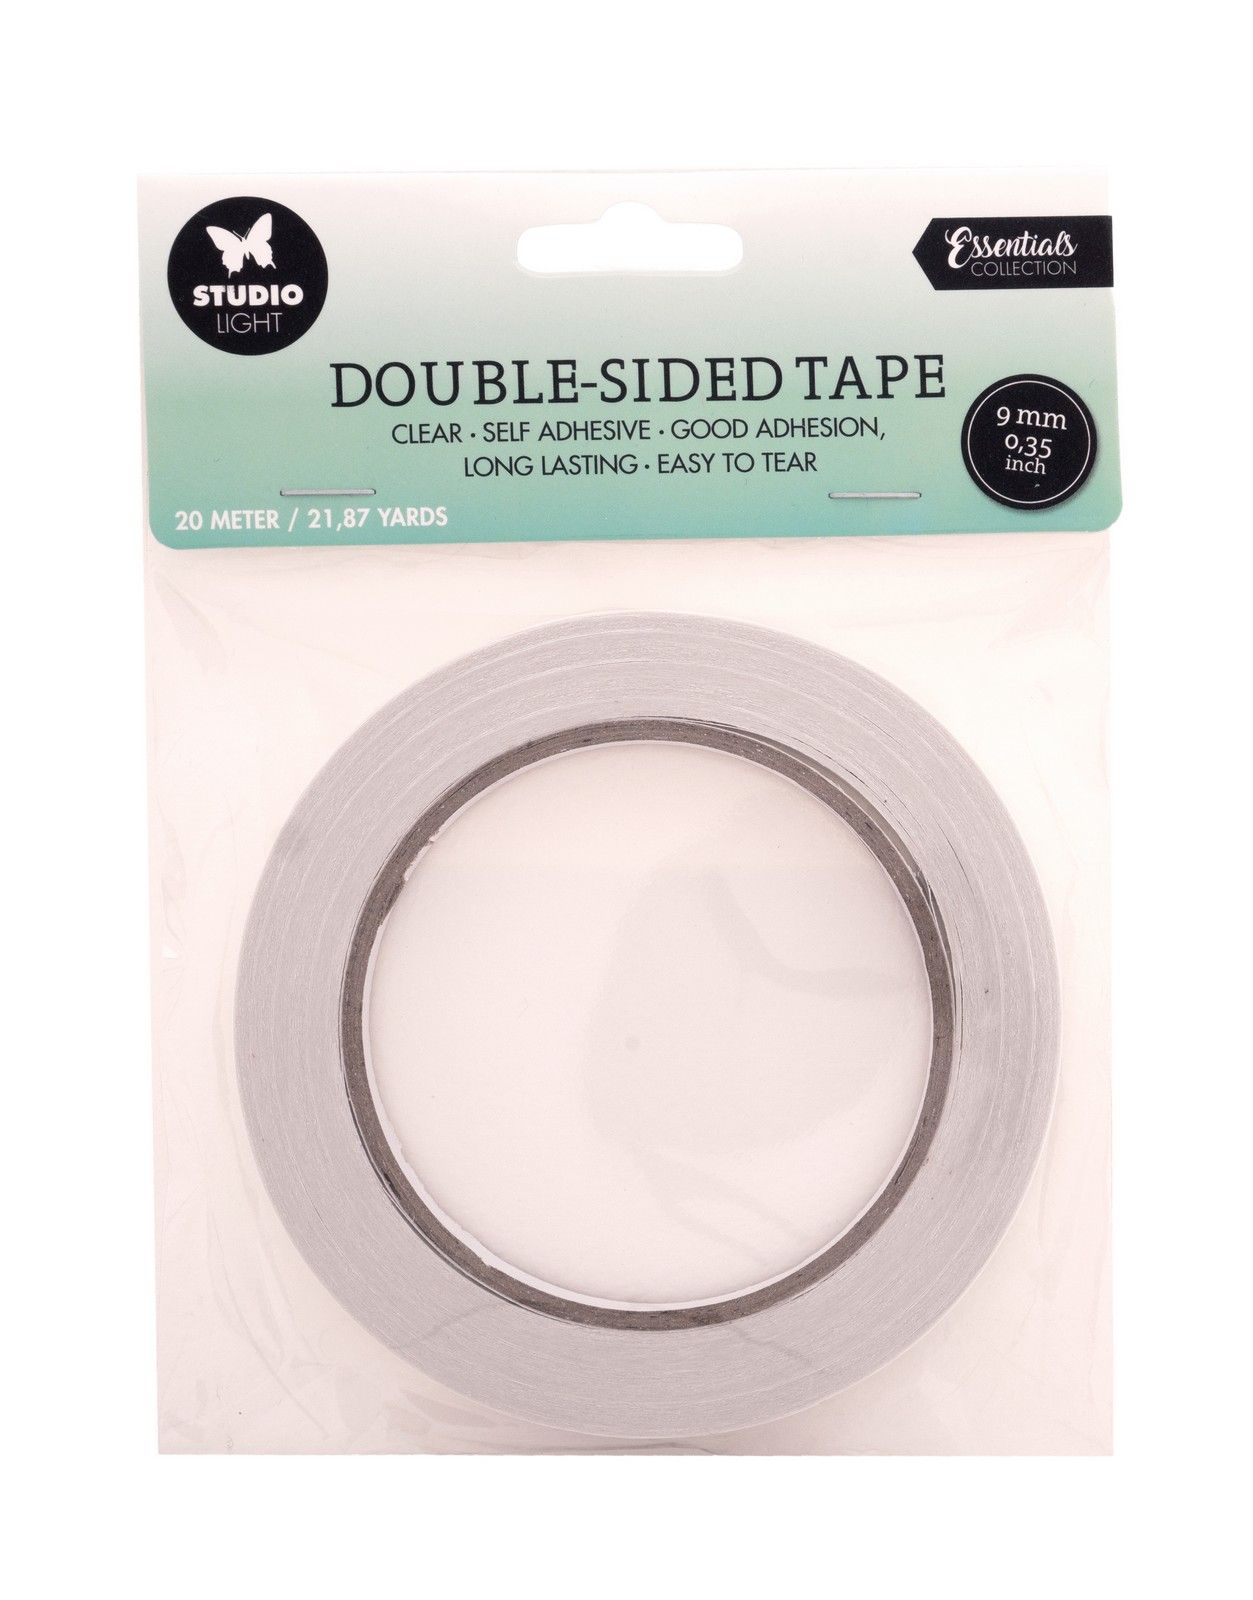 Studio Light • Essentials easy to tear doublesided adhesive tape 9mm